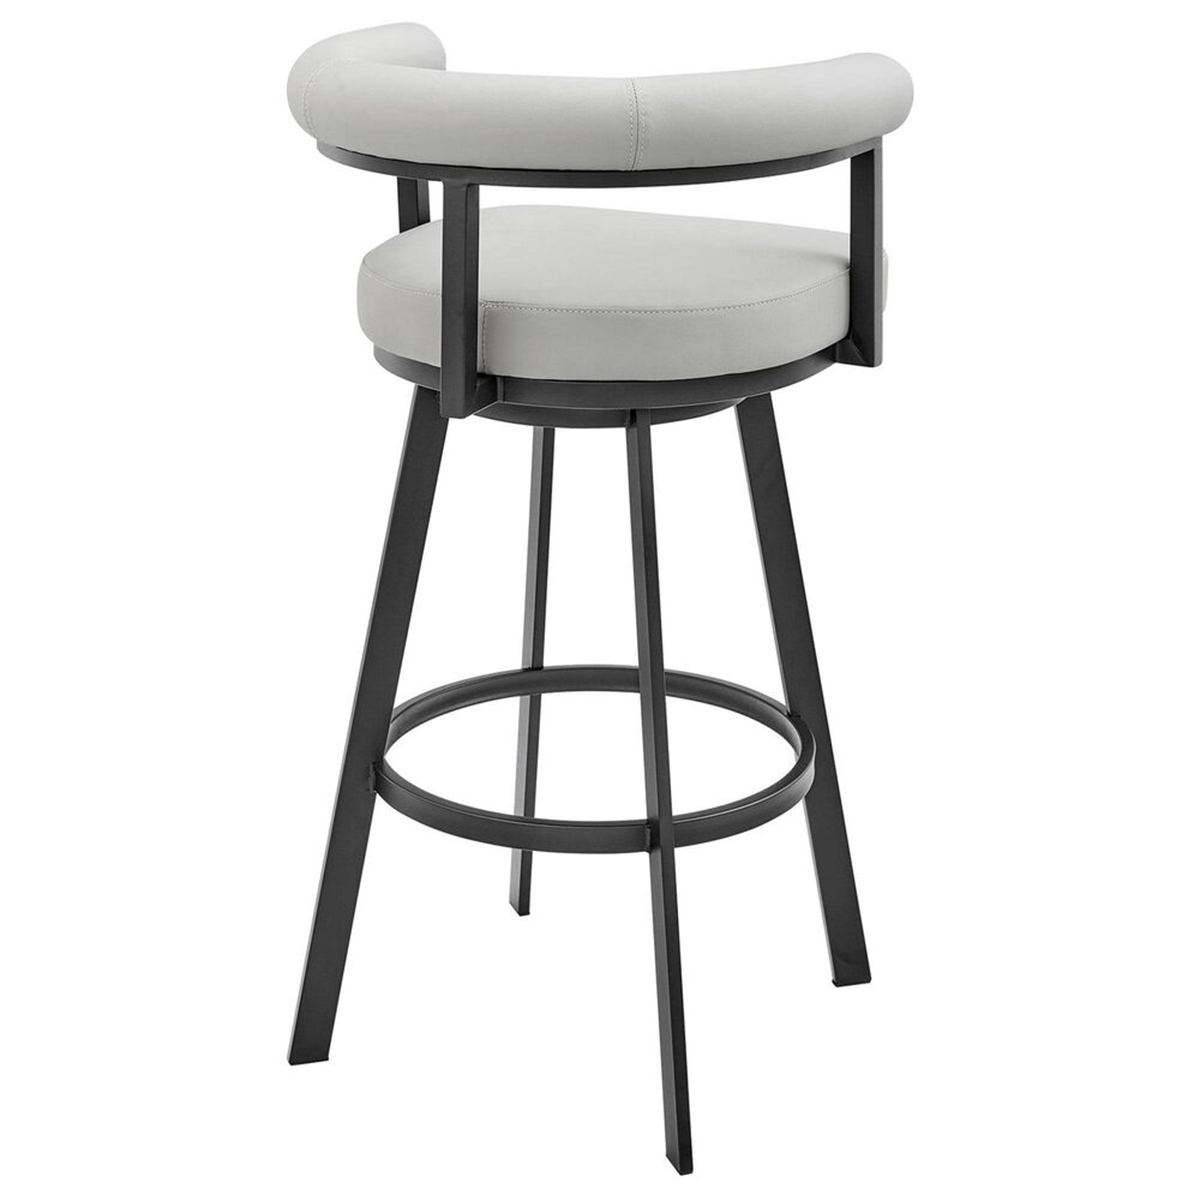 Picture of MAGNOLIA BLACK AND GREY 30" BARSTOOL